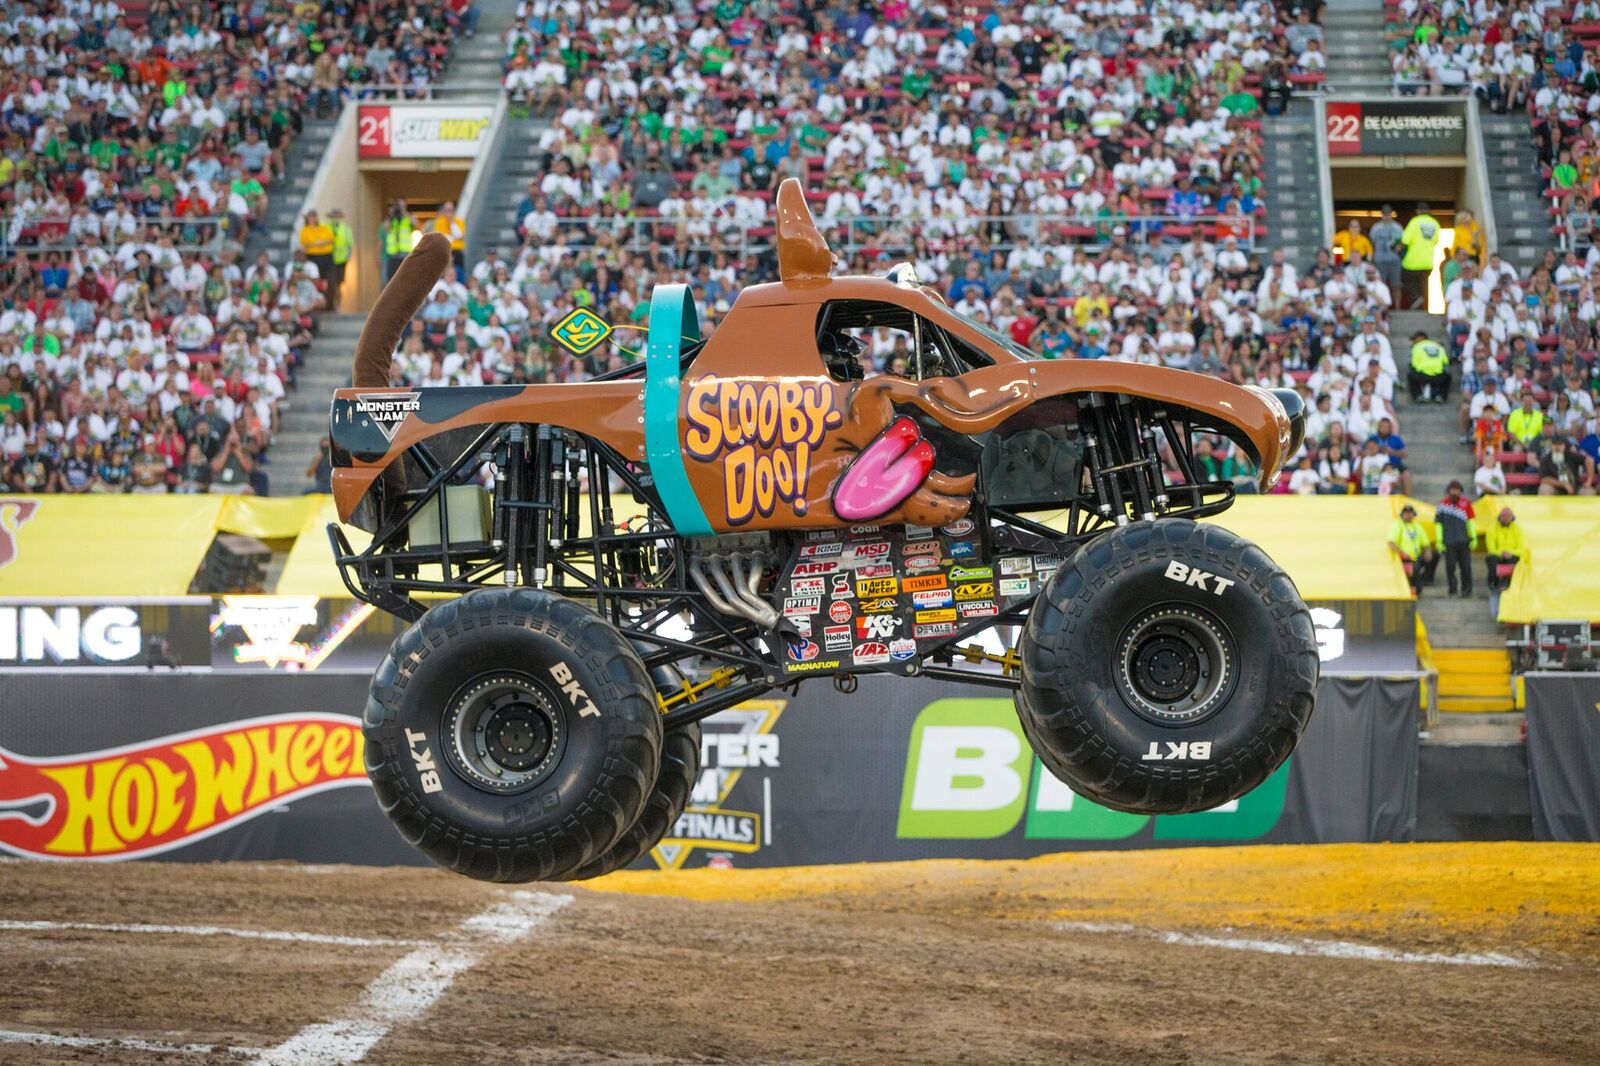 Tickets to Monster Jam Tampa